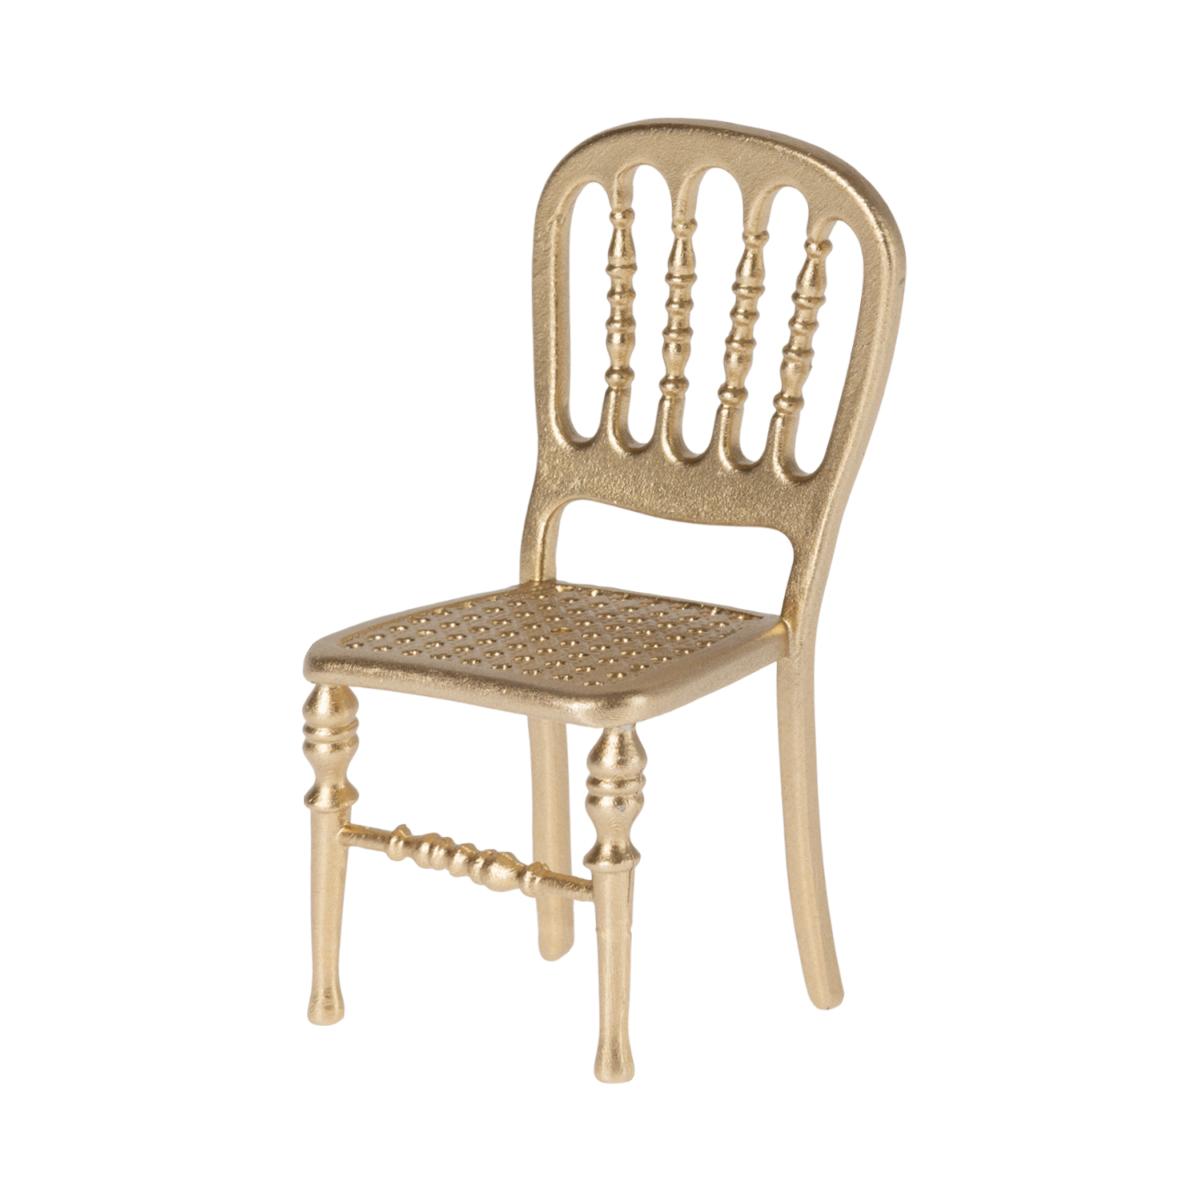 MOUSE CHAIR - GOLD